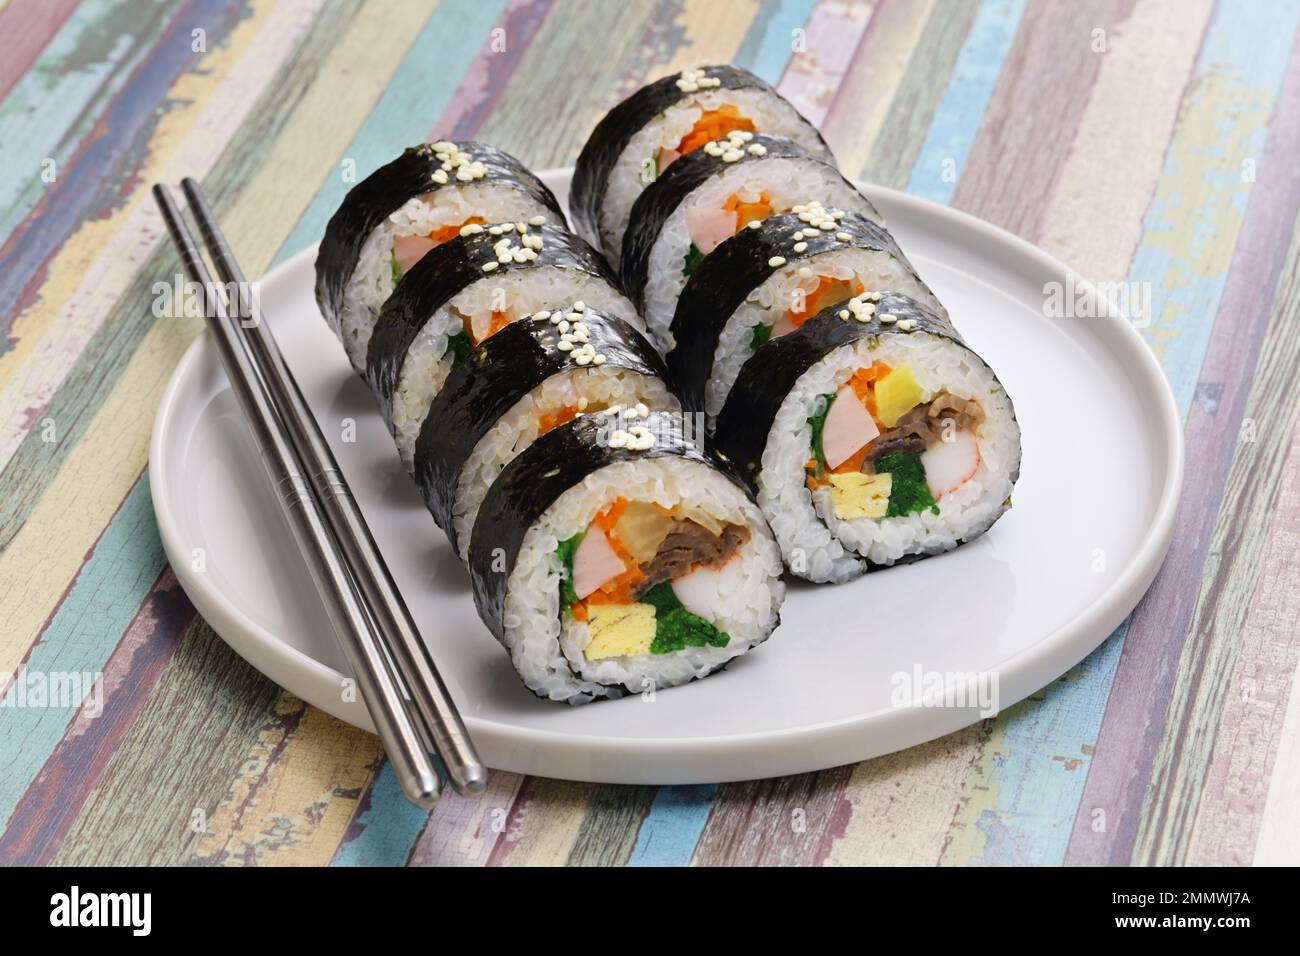 Gimbap is a Korean food consisting of rice and several ingredients seasoned with sesame oil and wrapped in nori seaweed. Stock Photo